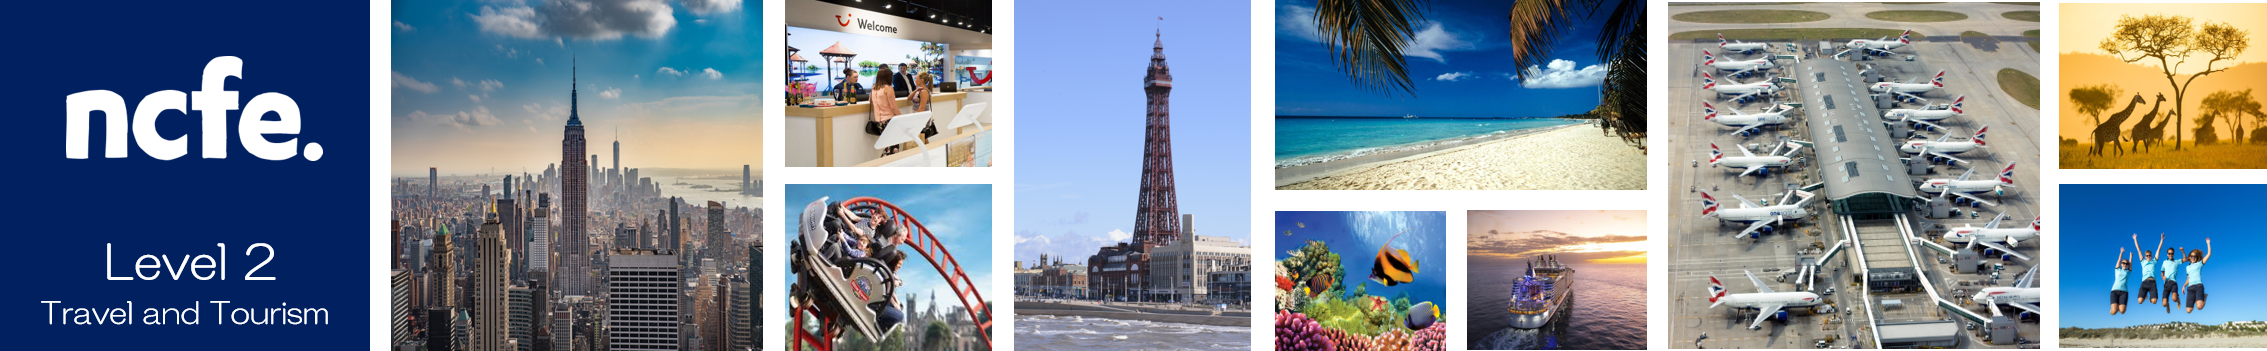 NCFE Level 2 Travel and Tourism